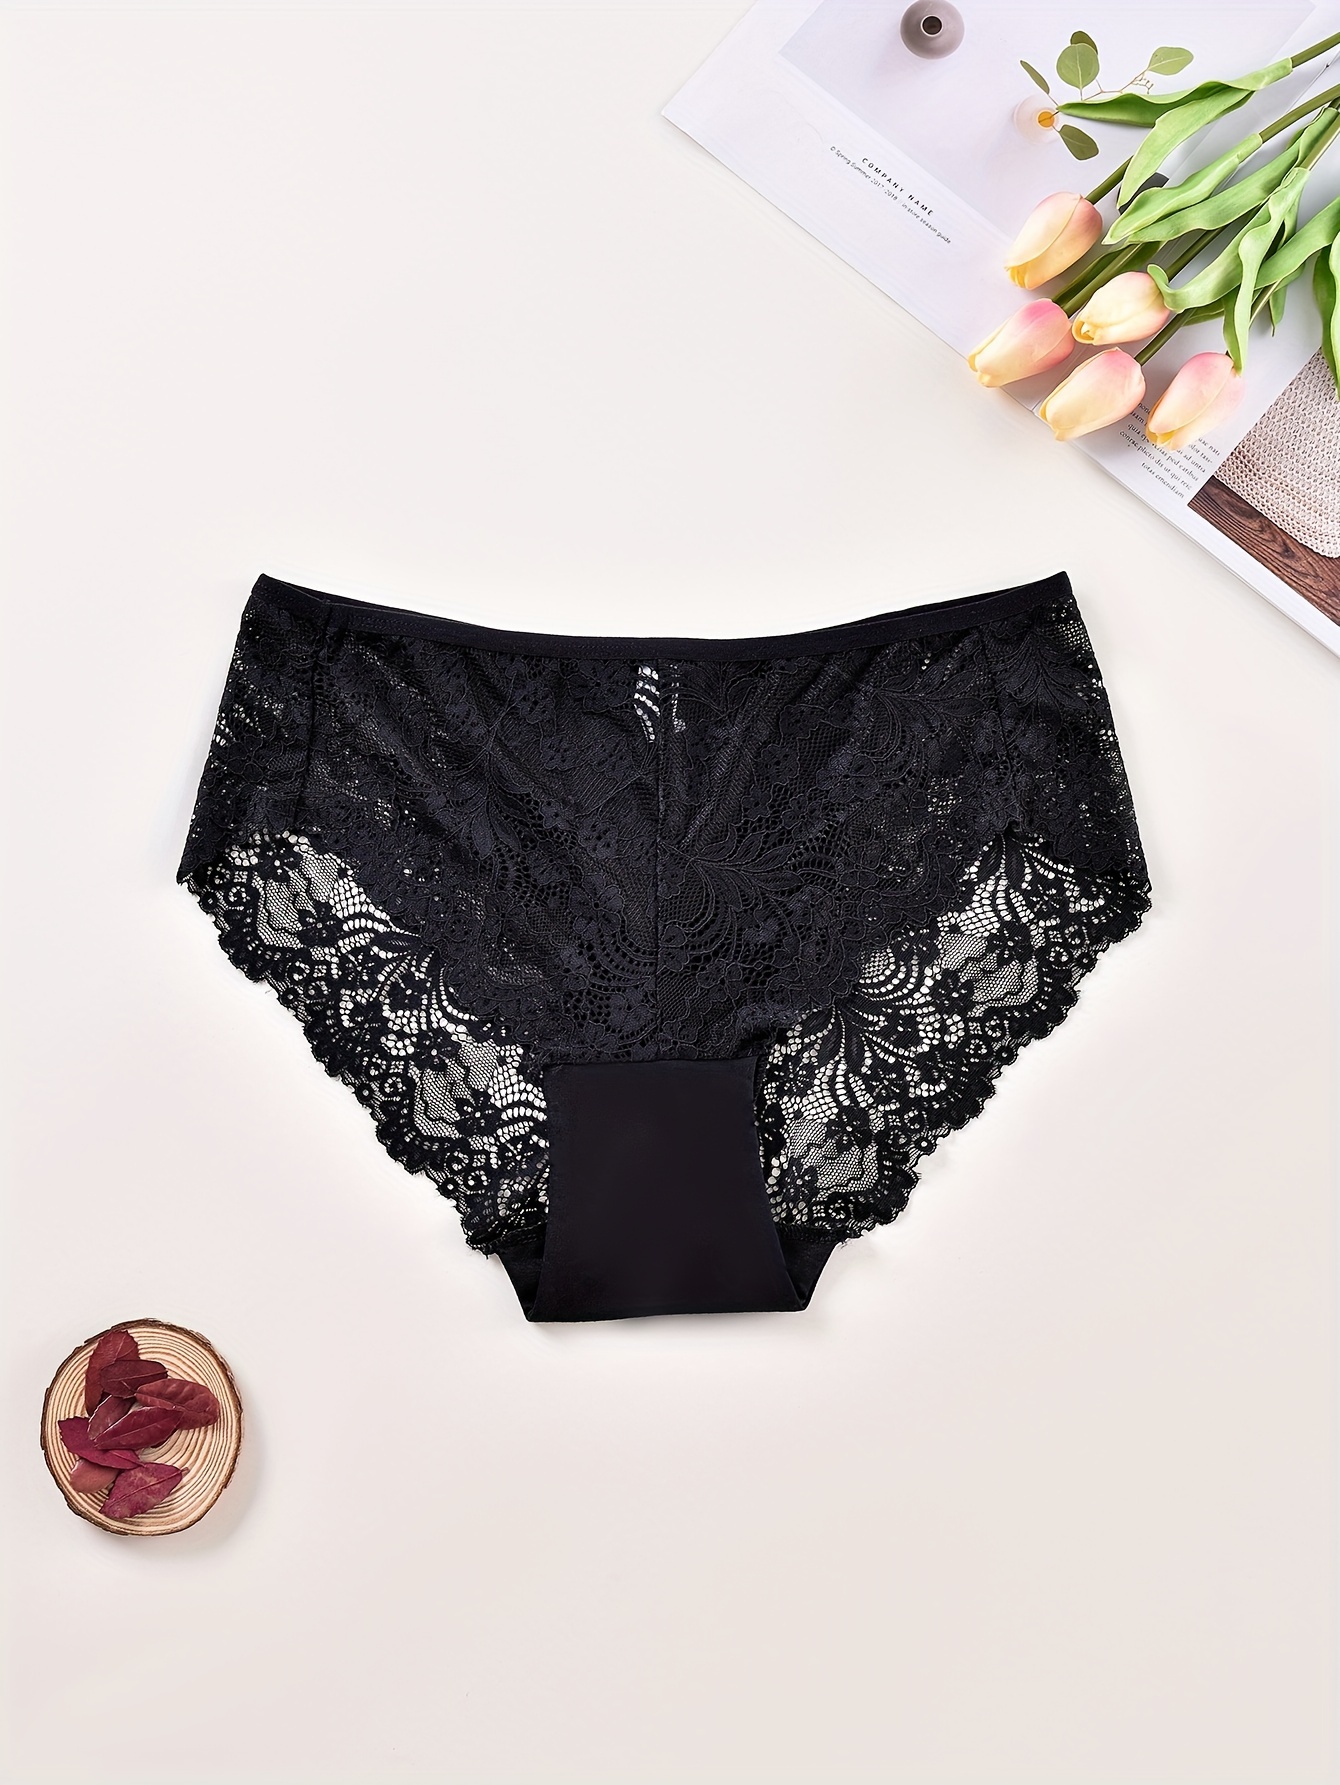 Black Lace Trim Comfort Full Brief Knickers 3 Pack, Lingerie